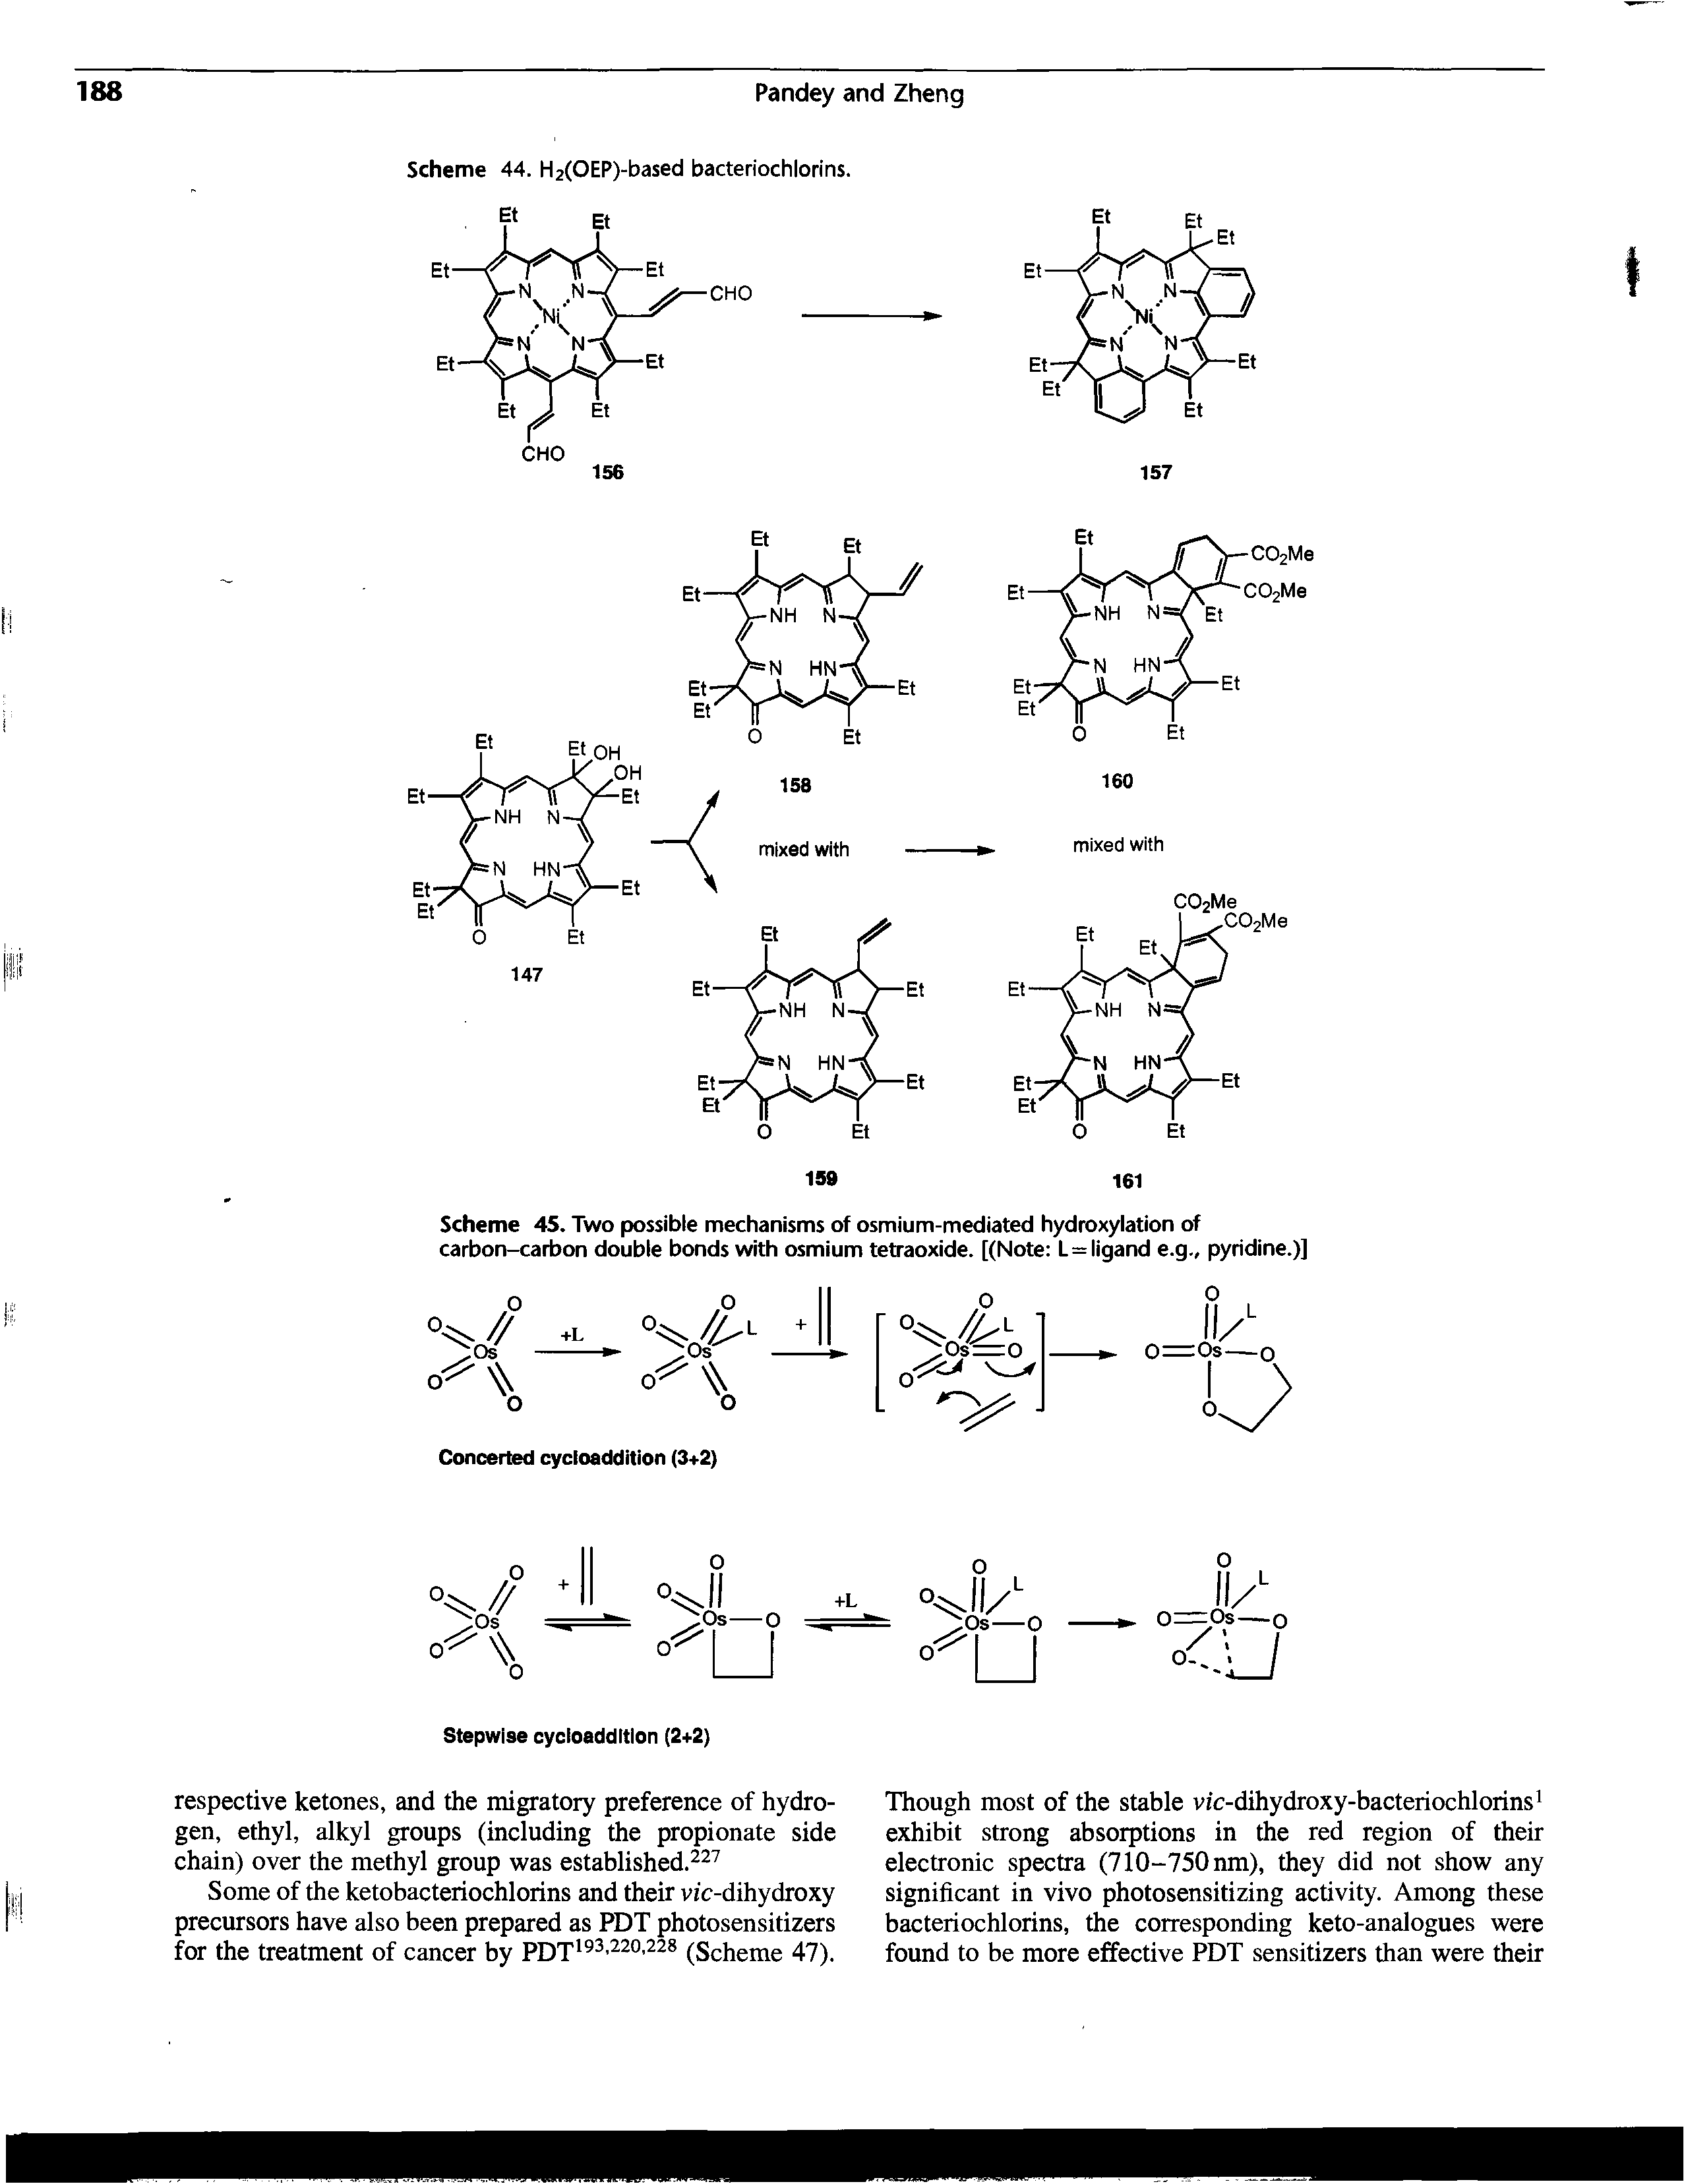 Scheme 45. Two possible mechanisms of osmium-mediated hydroxylation of carbon-carbon double bonds with osmium tetraoxide. [(Note L—ligand e.g., pyridine.)]...